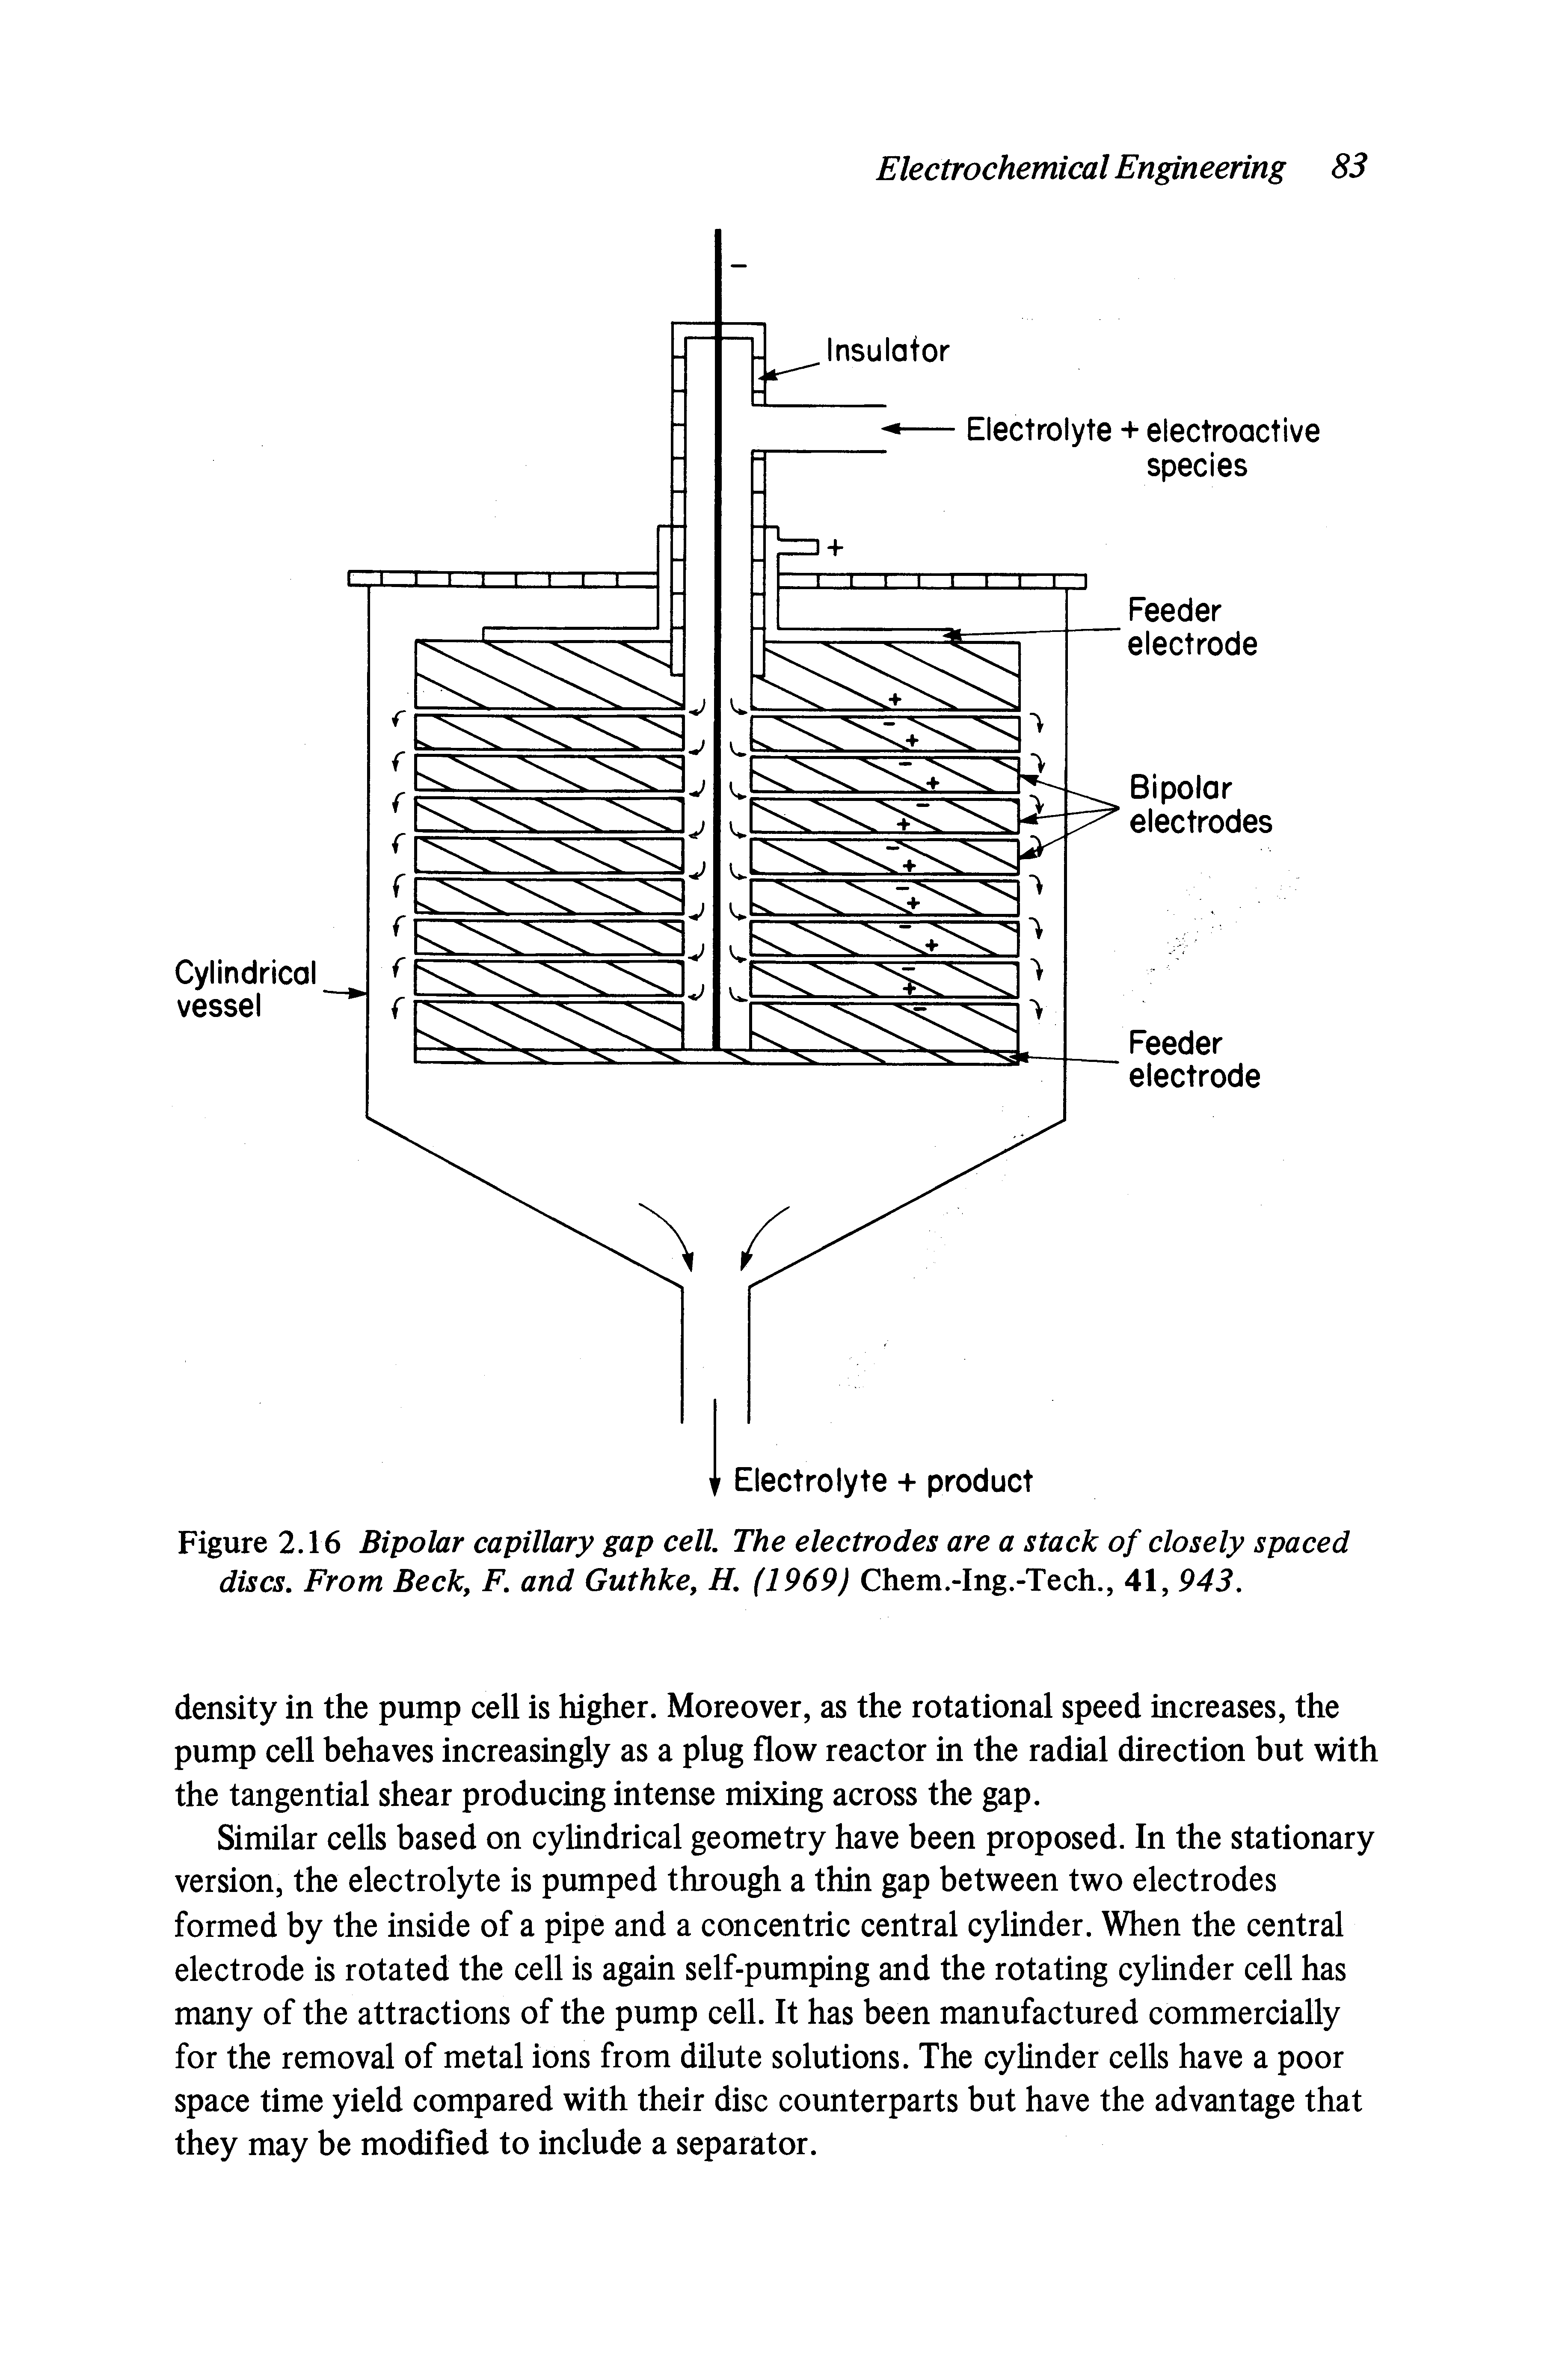 Figure 2.16 Bipolar capillary gap cell. The electrodes are a stack of closely spaced discs. From Beck, F. and Guthke, H. (1969) Chem.-Ing.-Tech., 41, 943.